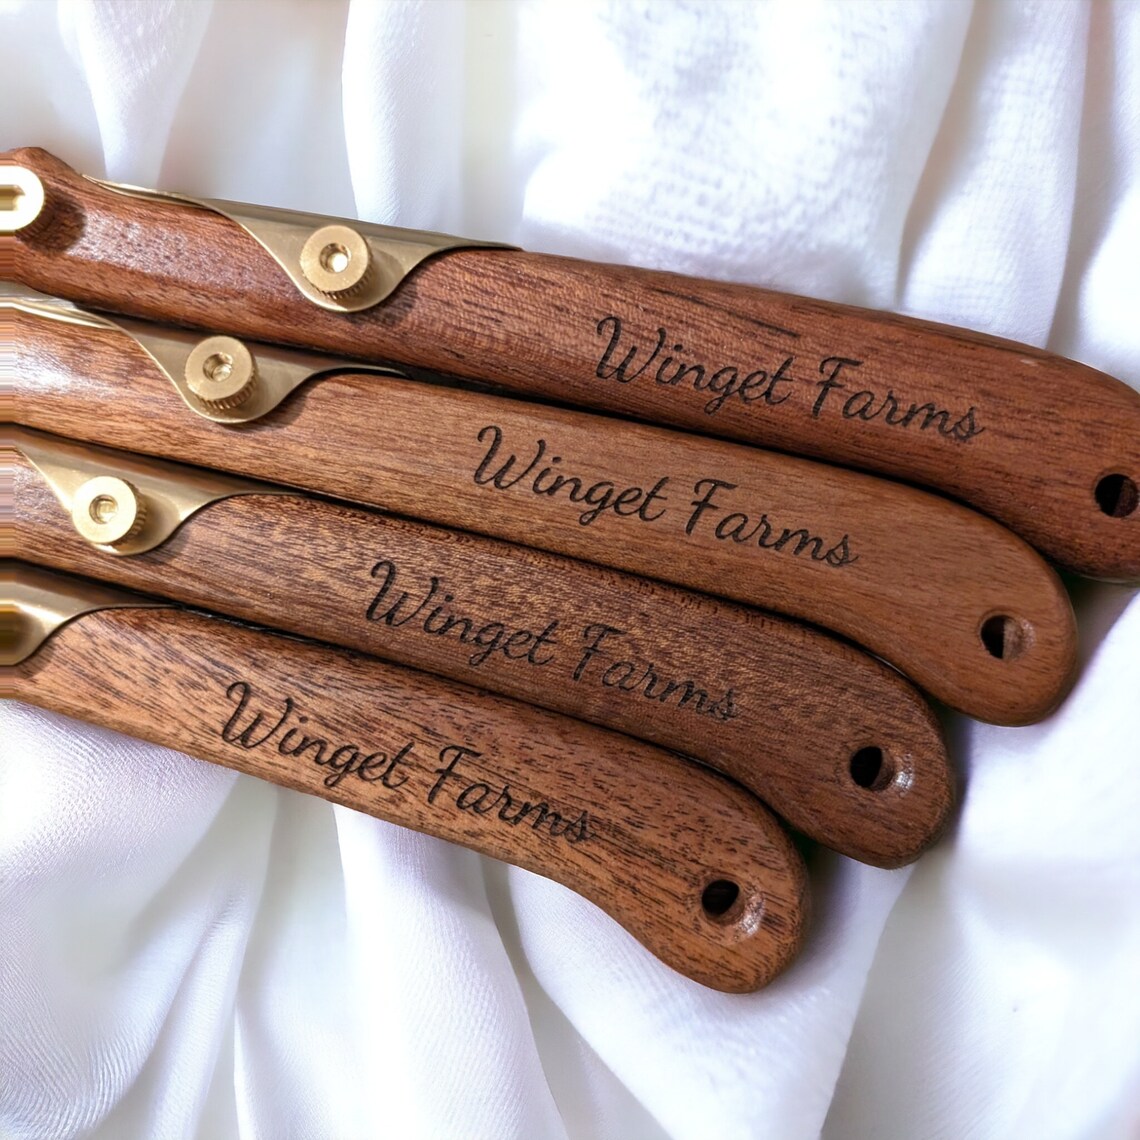 Baker's Traditional Bread Lame - Winget Farms Engraved Bread Scoring Tool  for Artisan sourdough and breads baked goods - Gifts for Baker